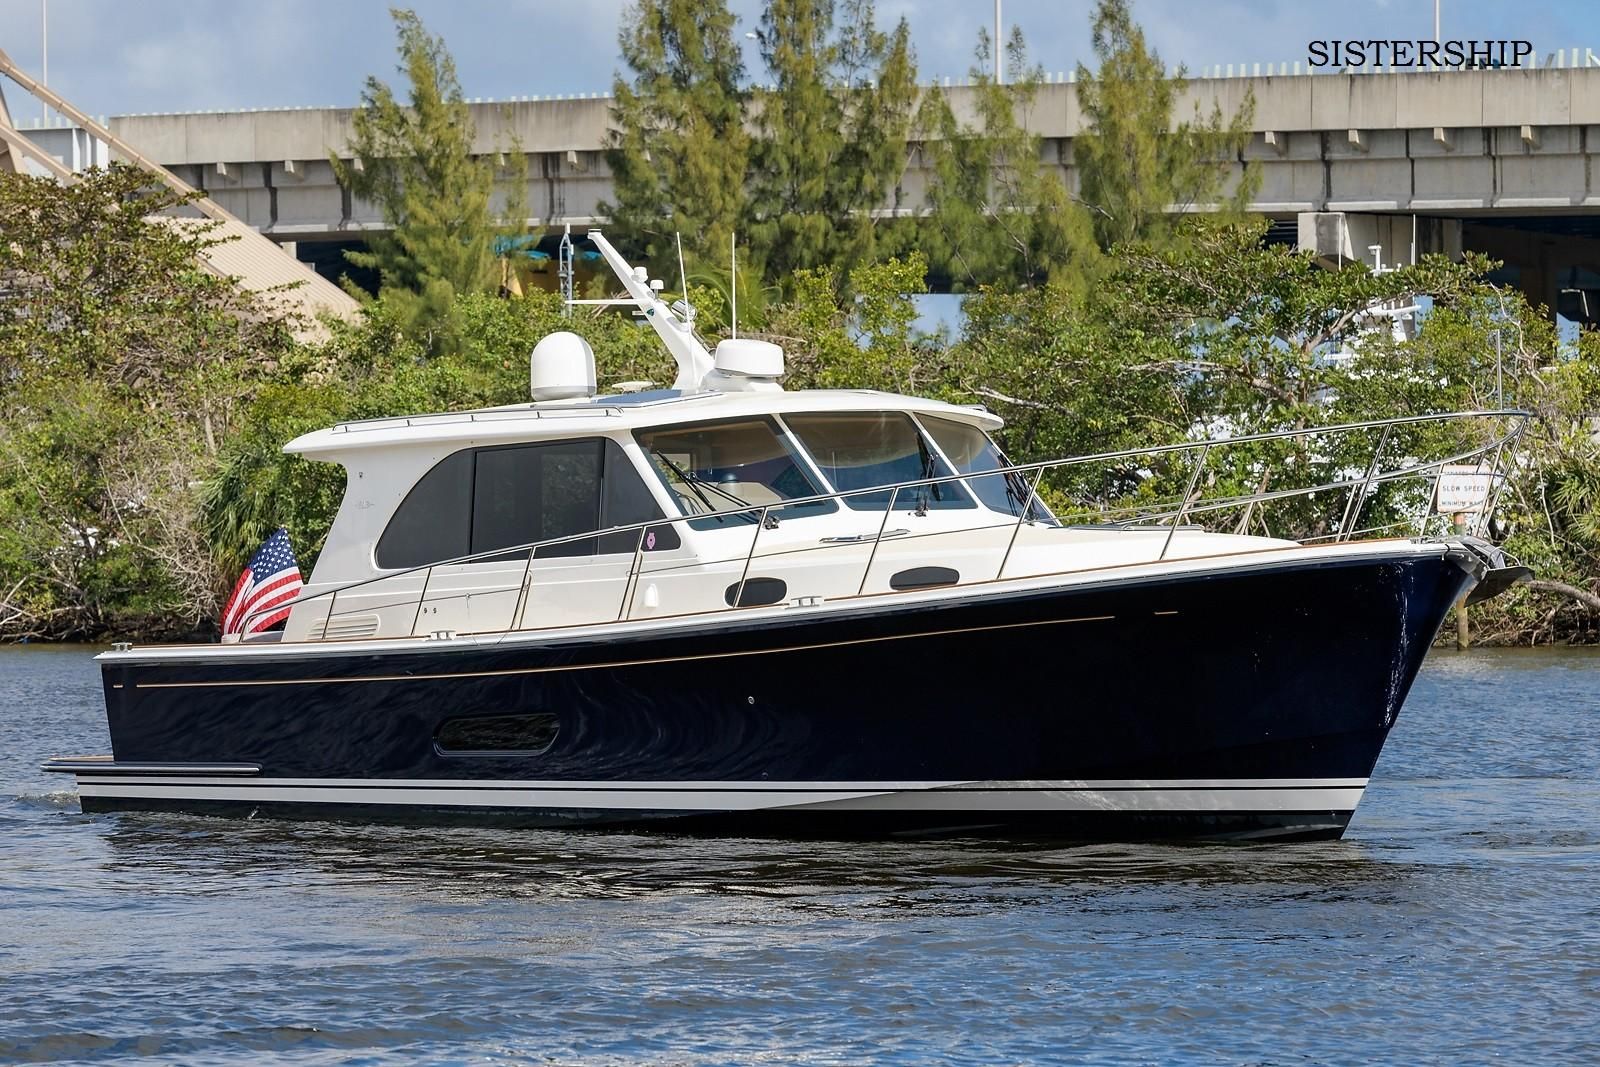 eastbay yachts for sale